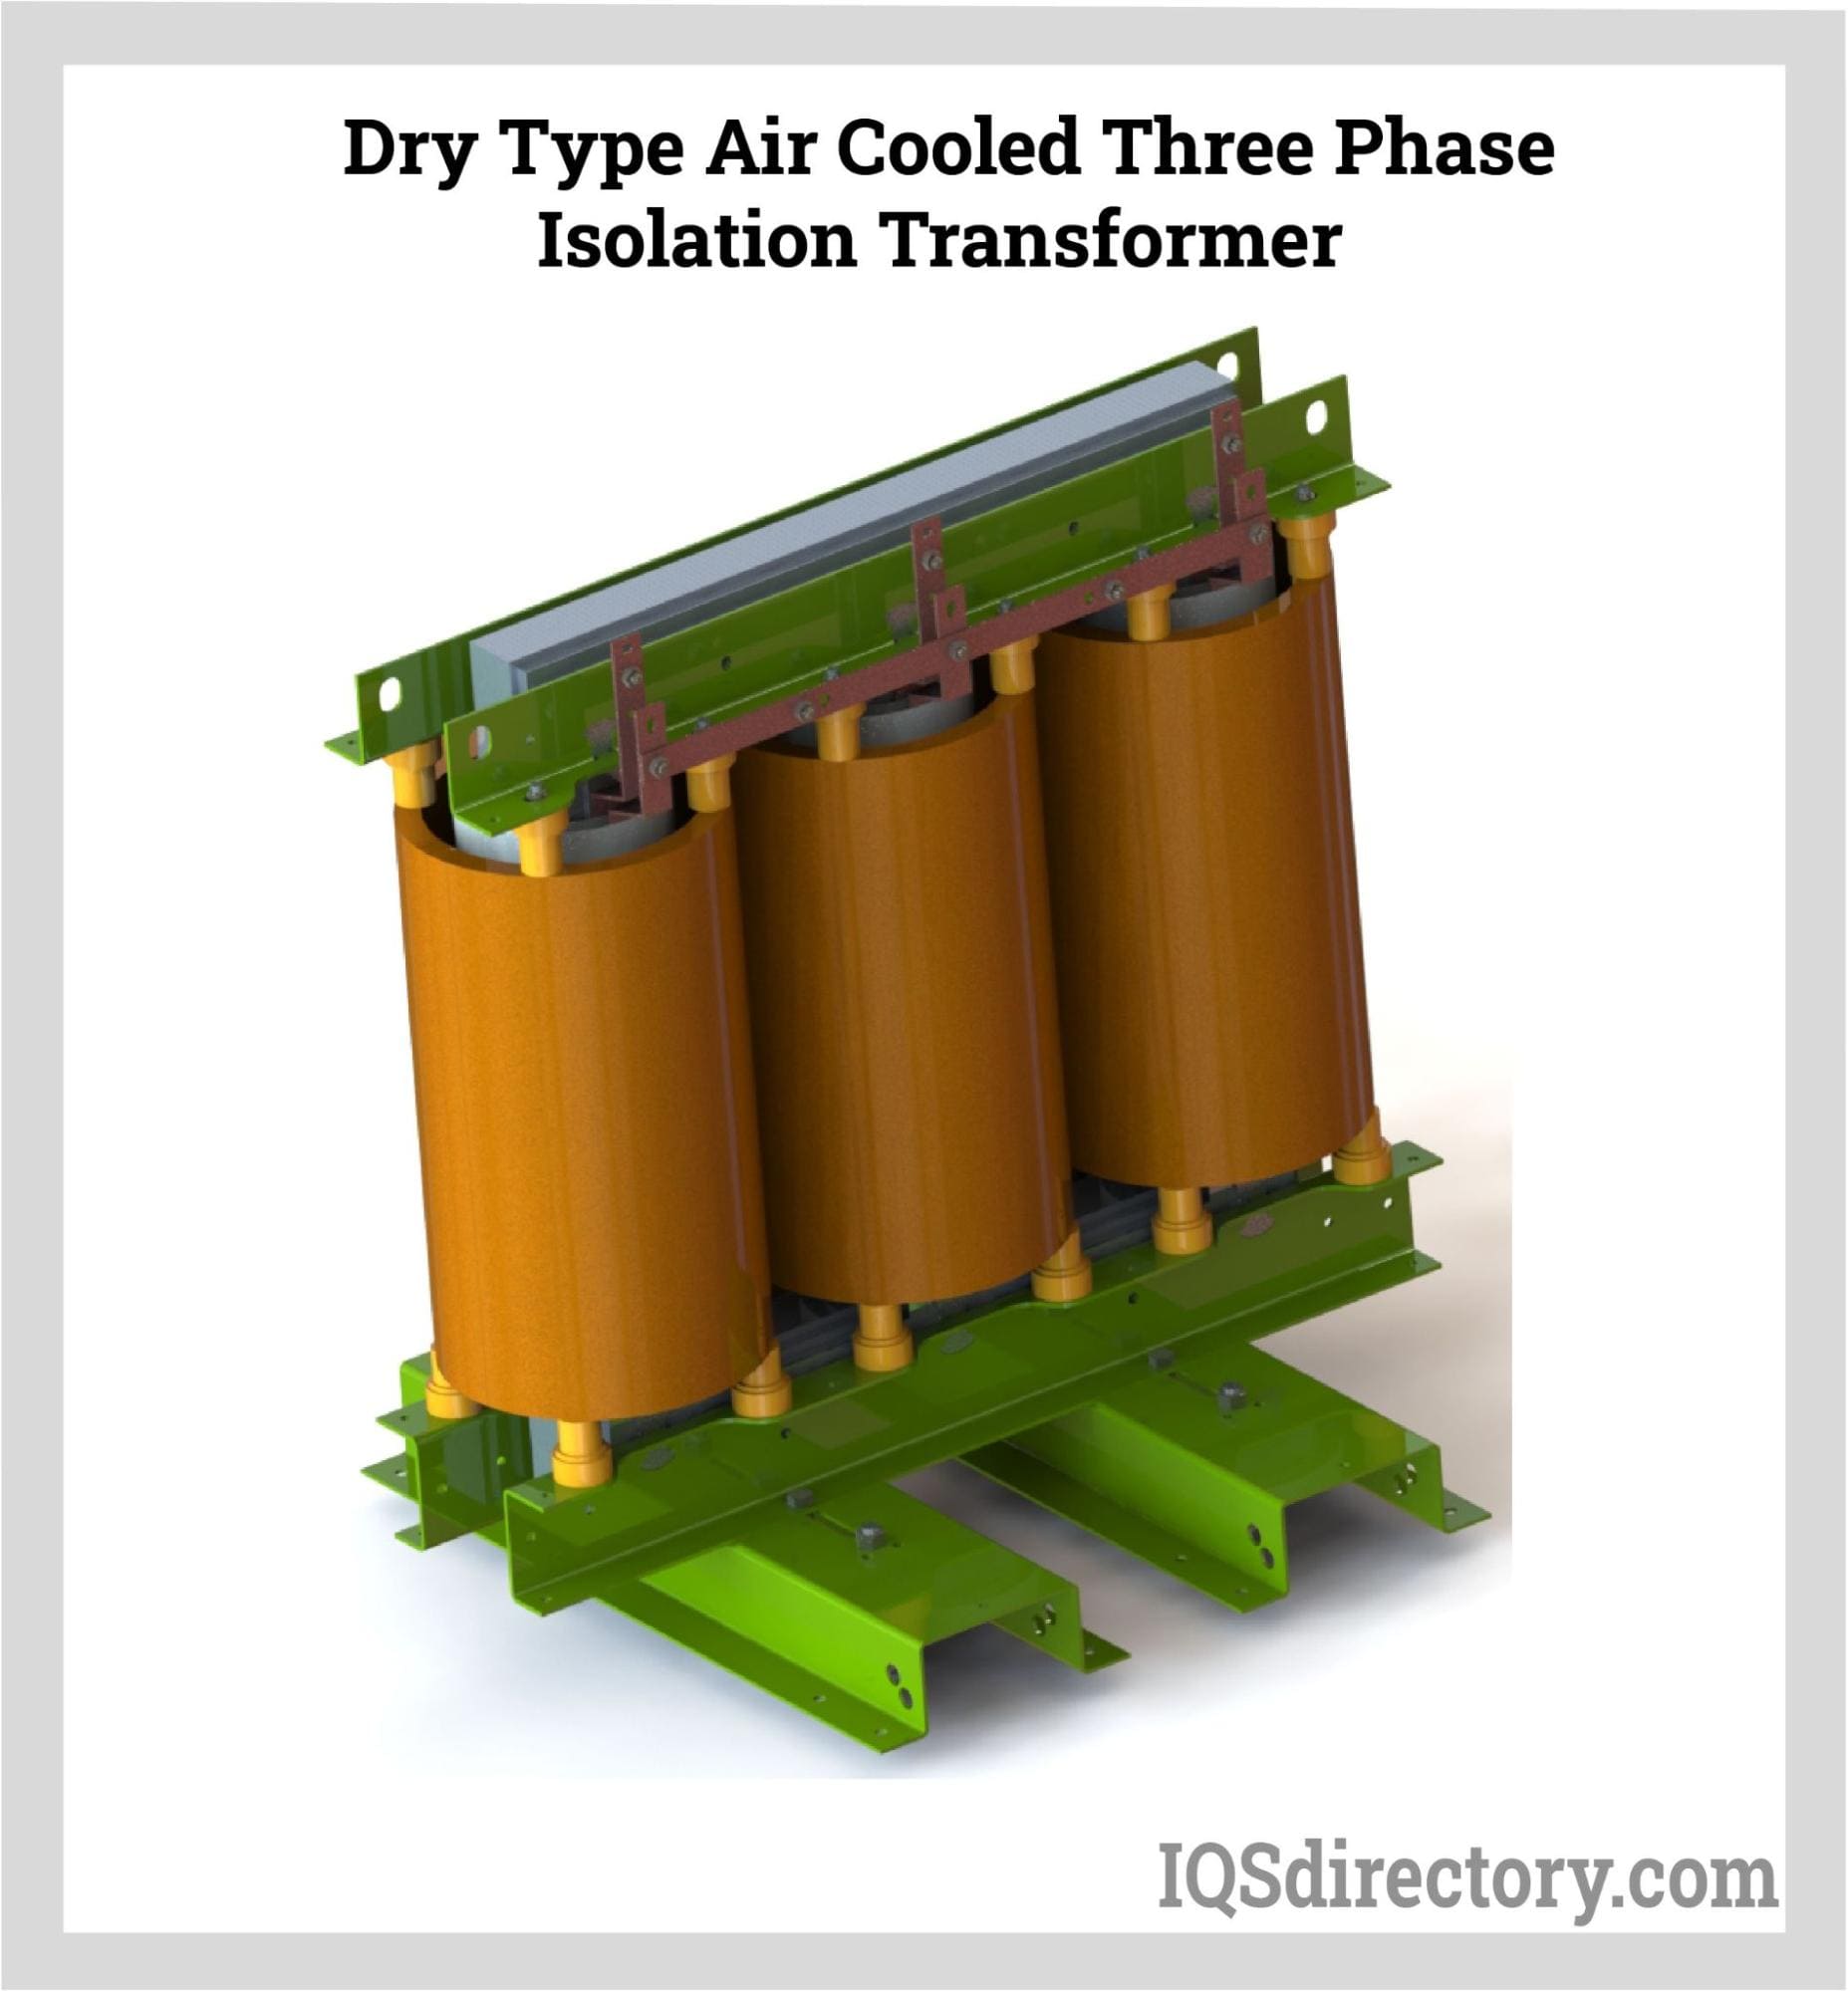 Dry Type Air Cooled Three Phase Isolation Transformer